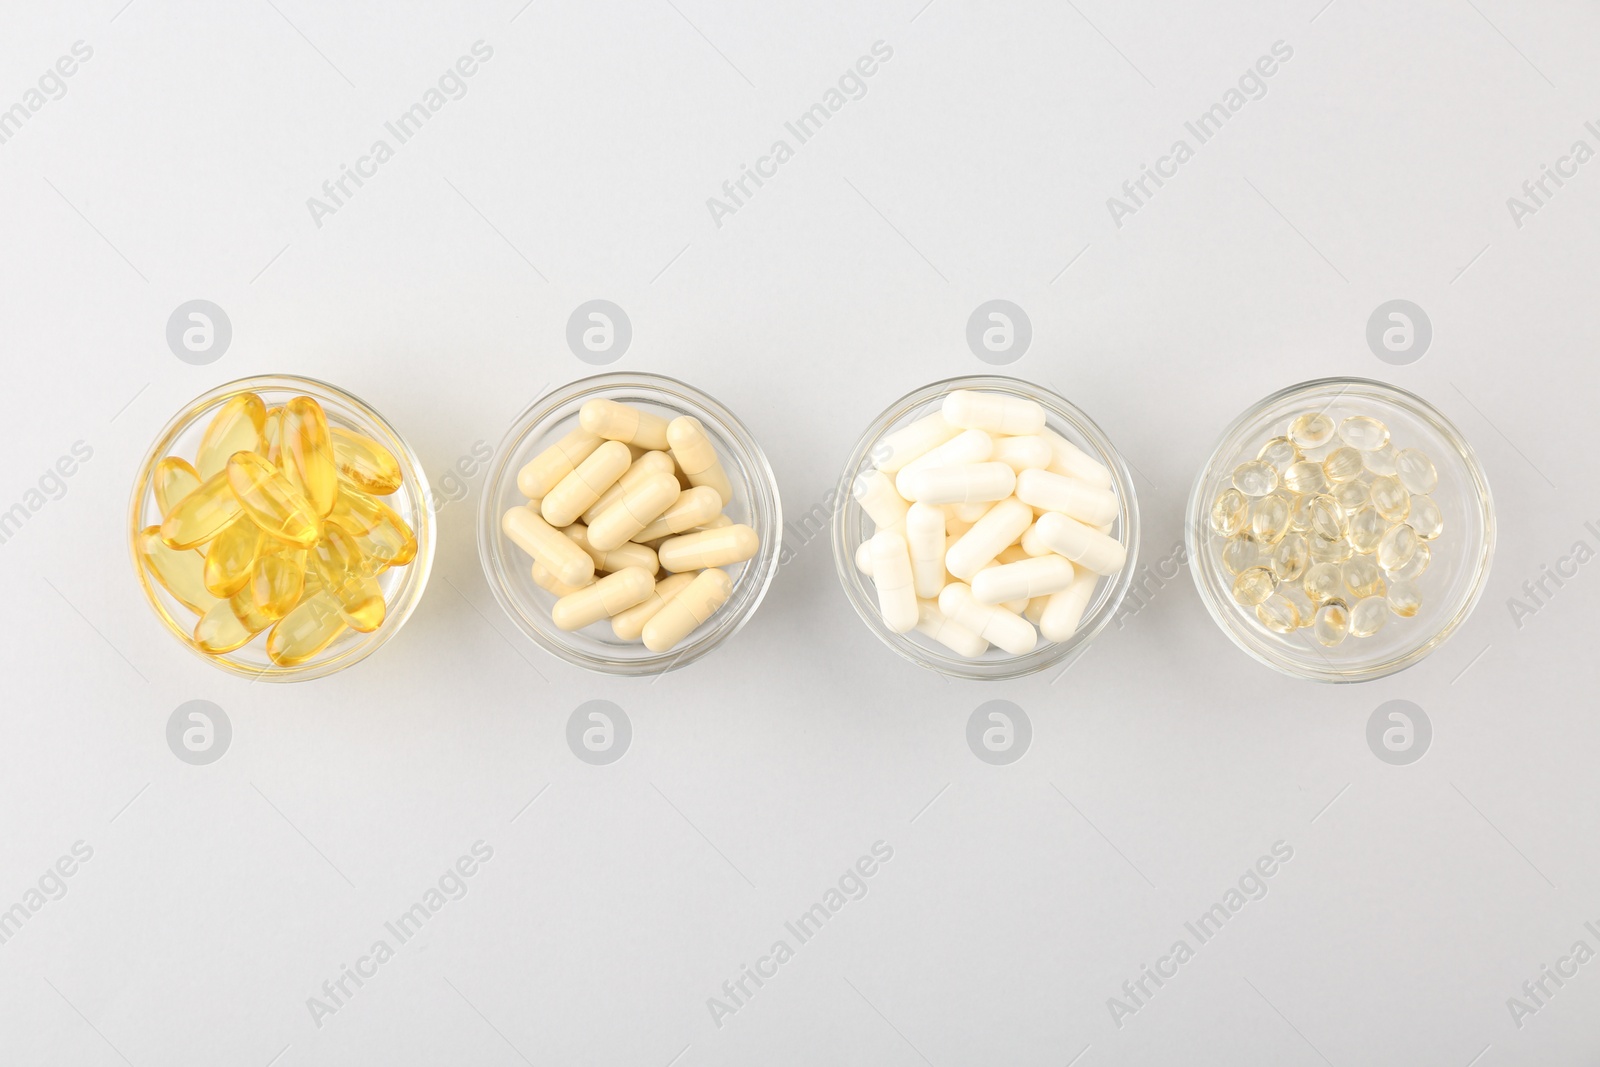 Photo of Different vitamin capsules in glass bowls on light grey background, flat lay